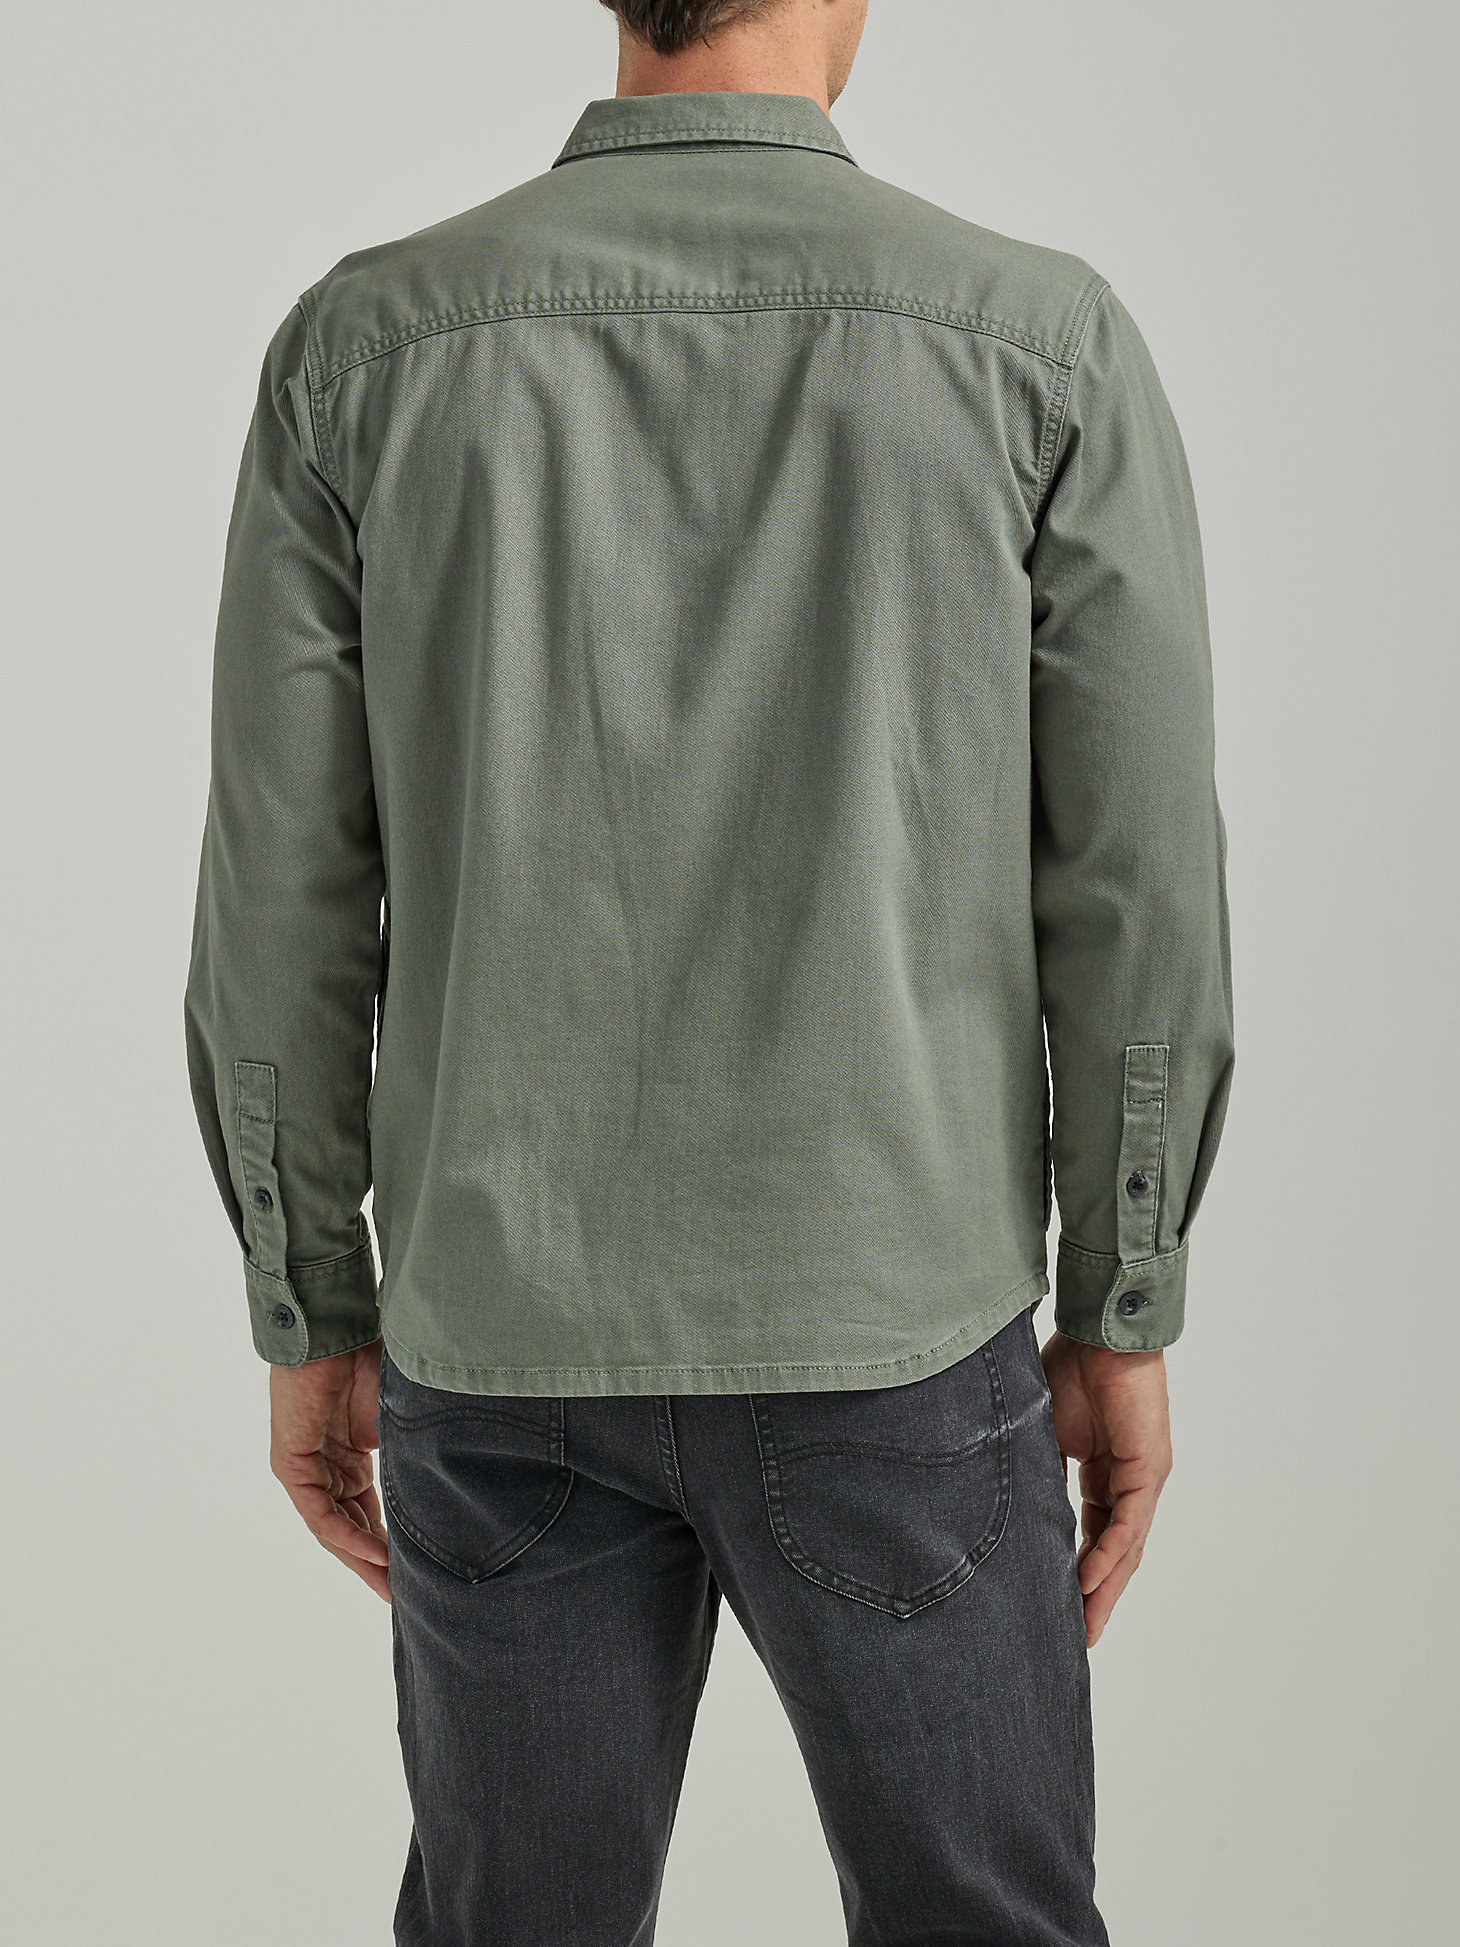 Men's Workwear Solid Overshirt in Fort Green alternative view 1